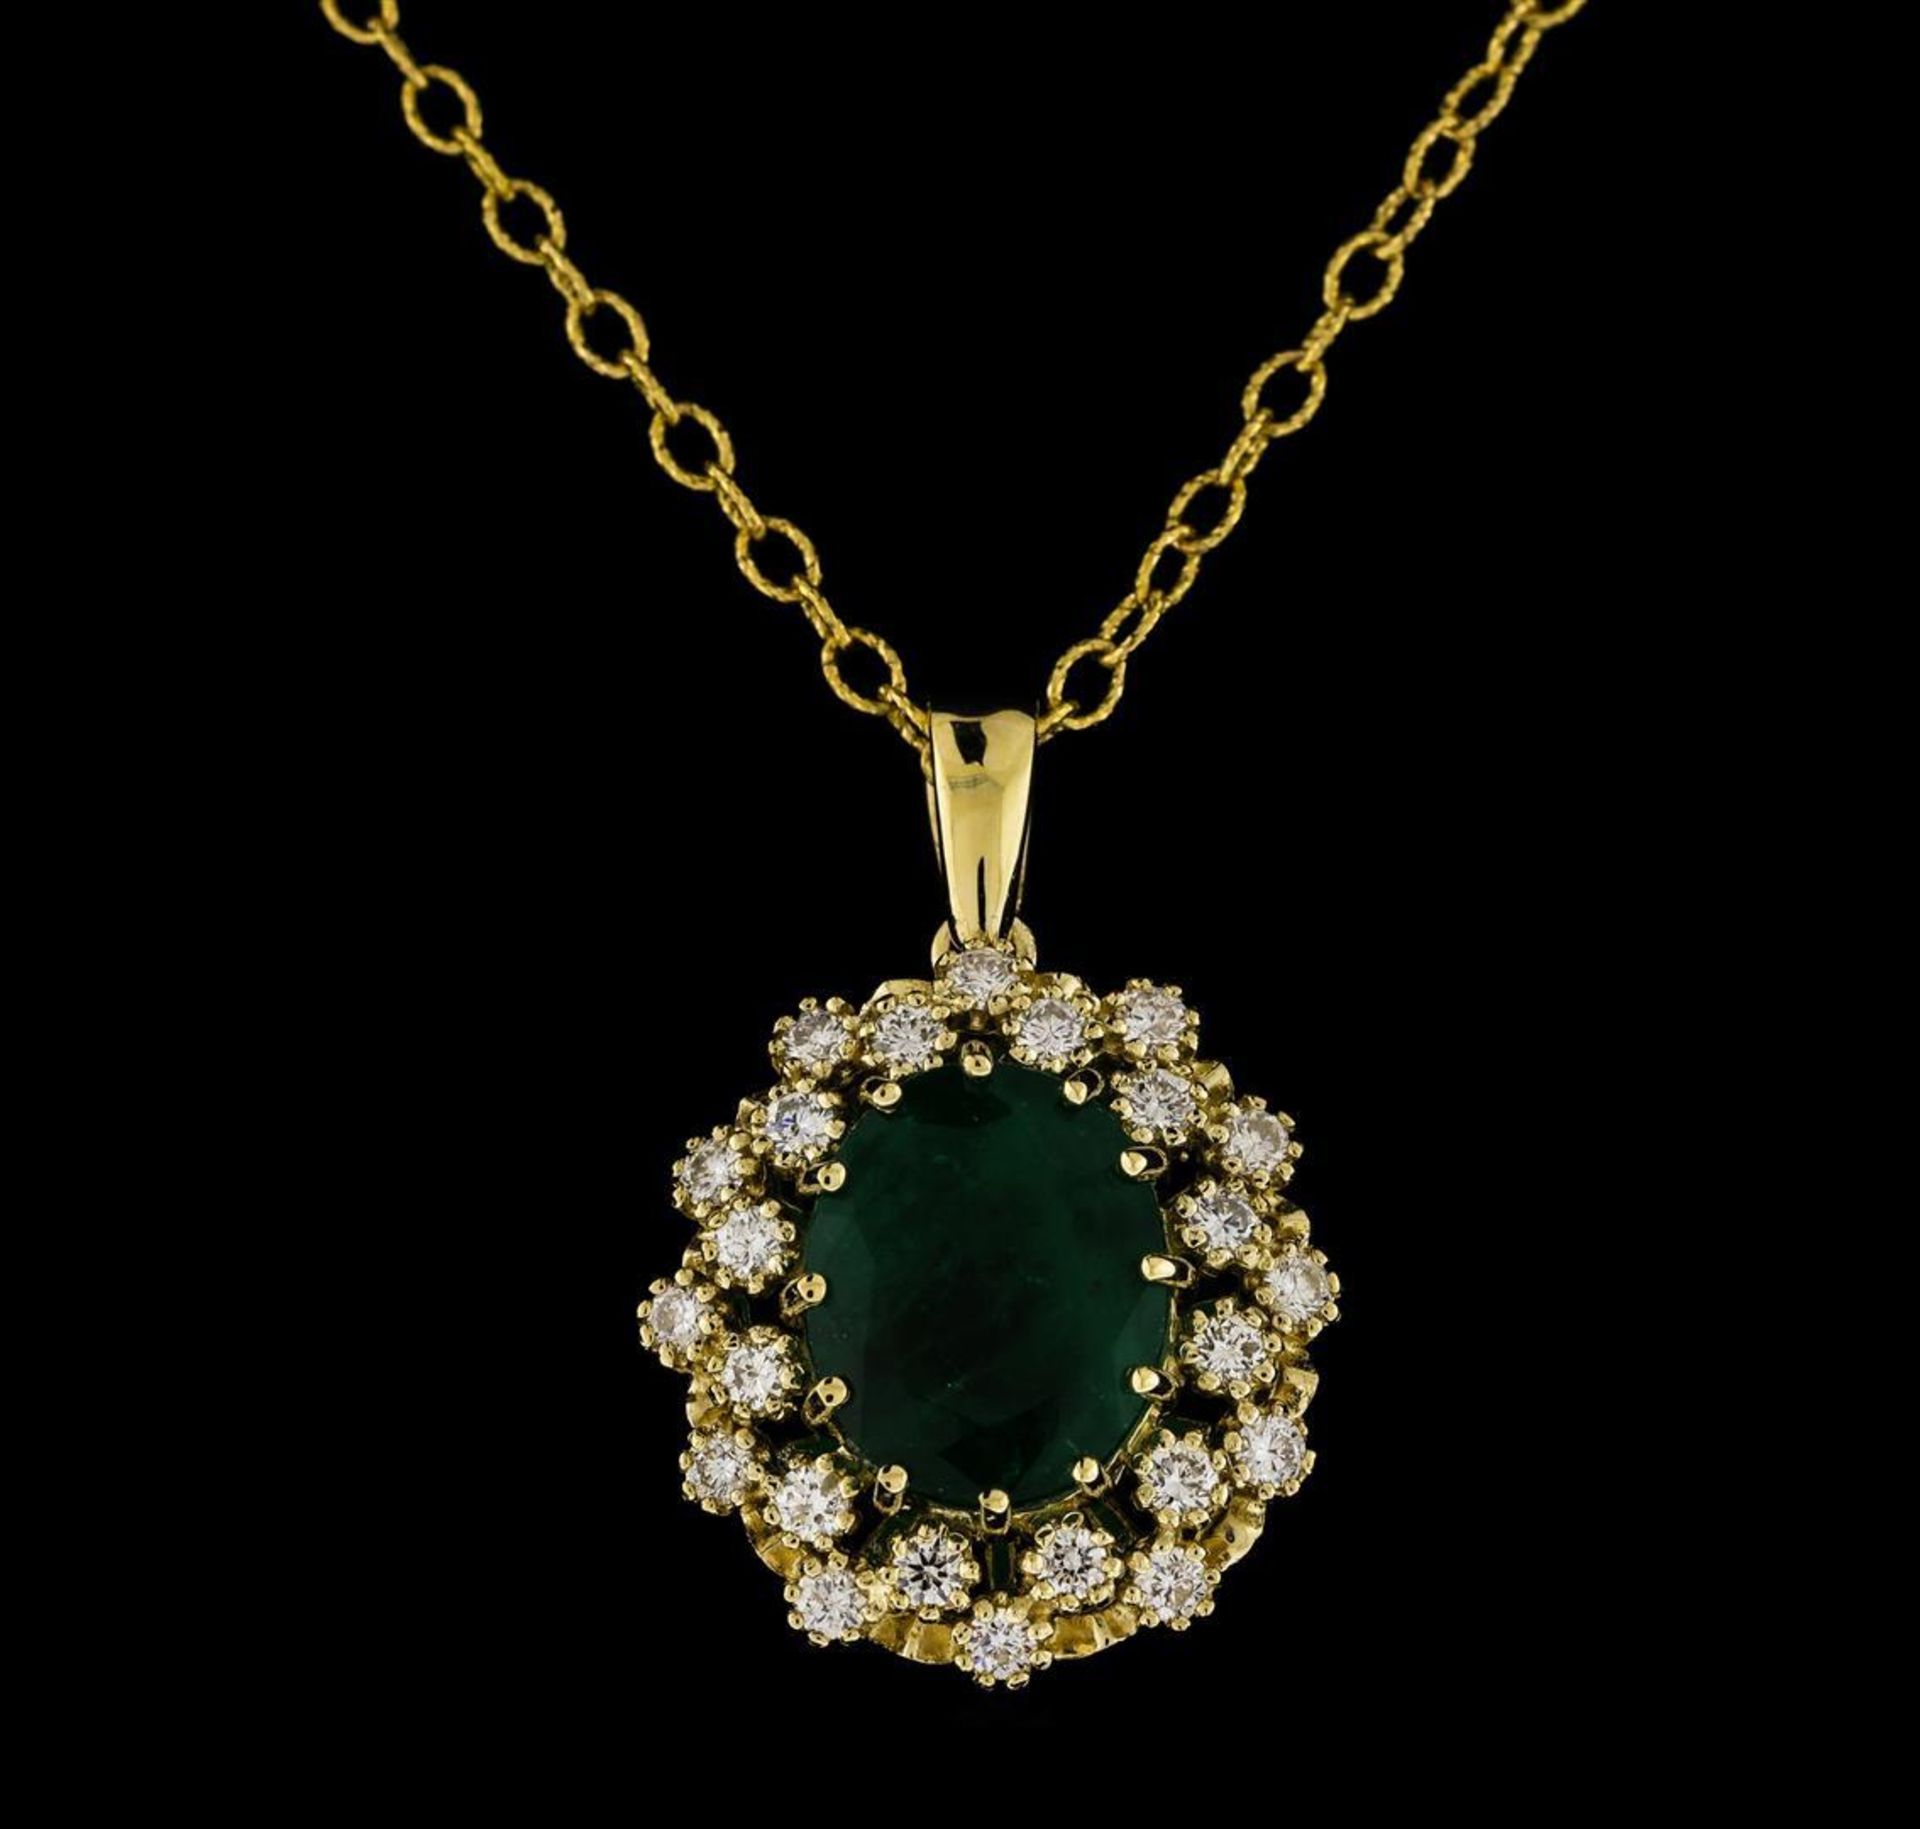 4.30 ctw Emerald and Diamond Pendant With Chain - 14KT Yellow Gold - Image 2 of 3